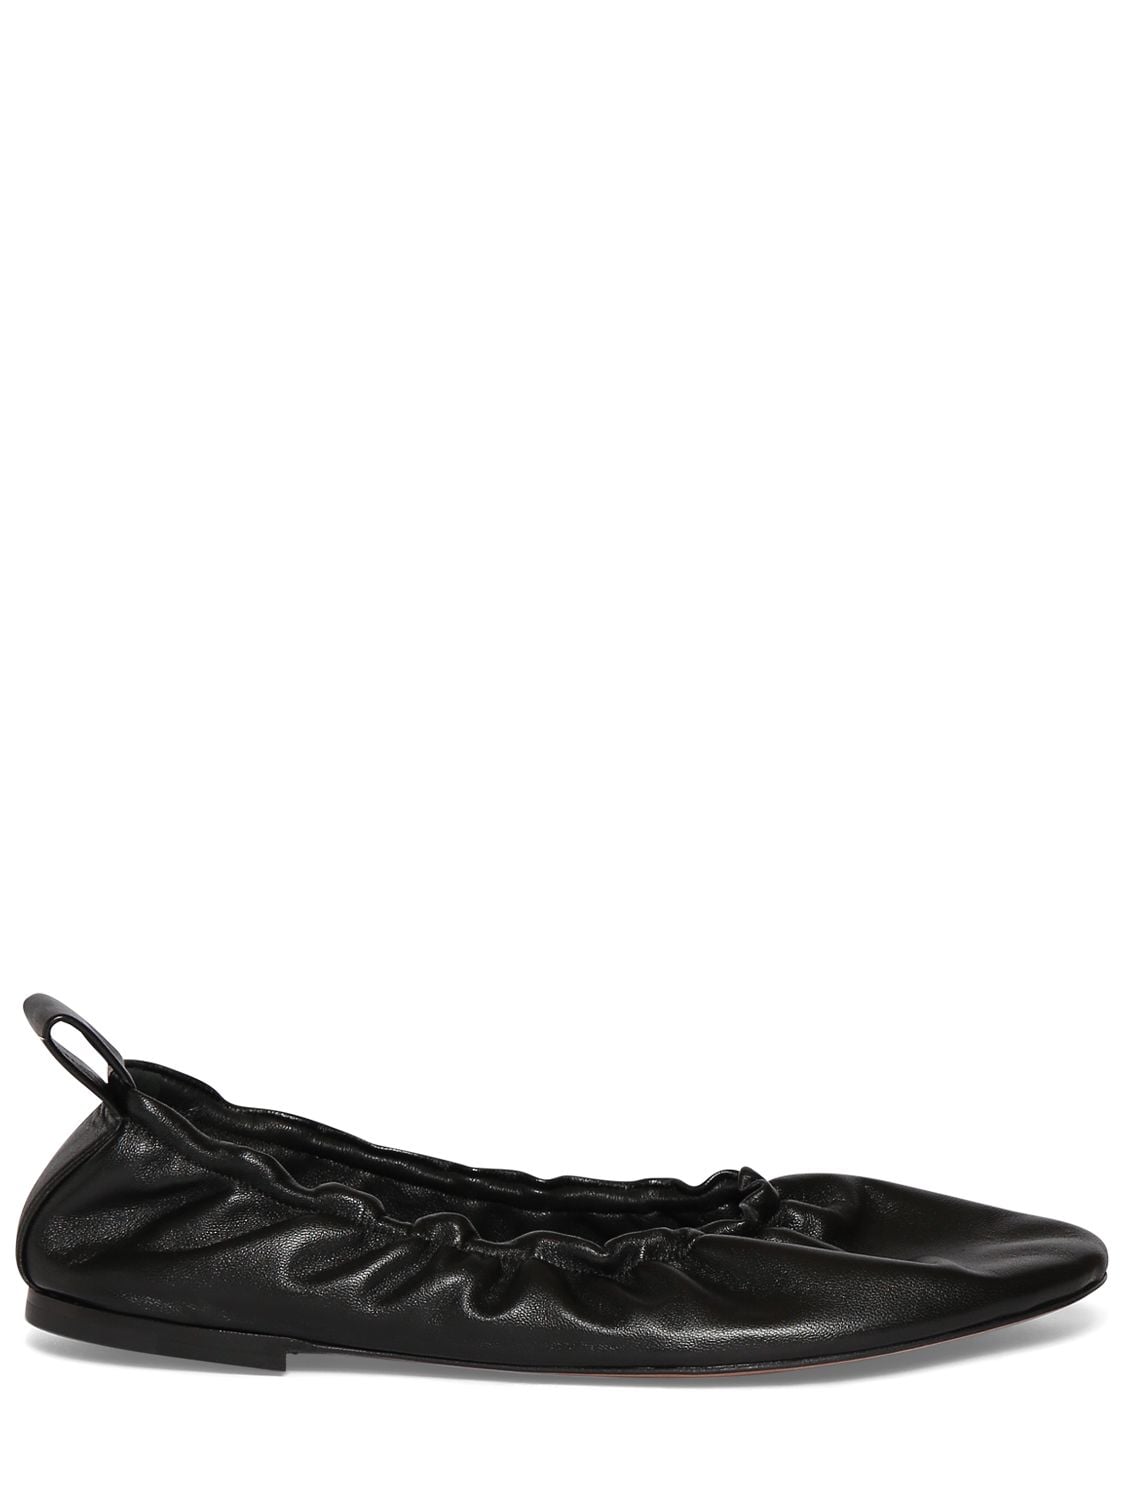 THE ROW GLOVE LEATHER BALLET FLATS